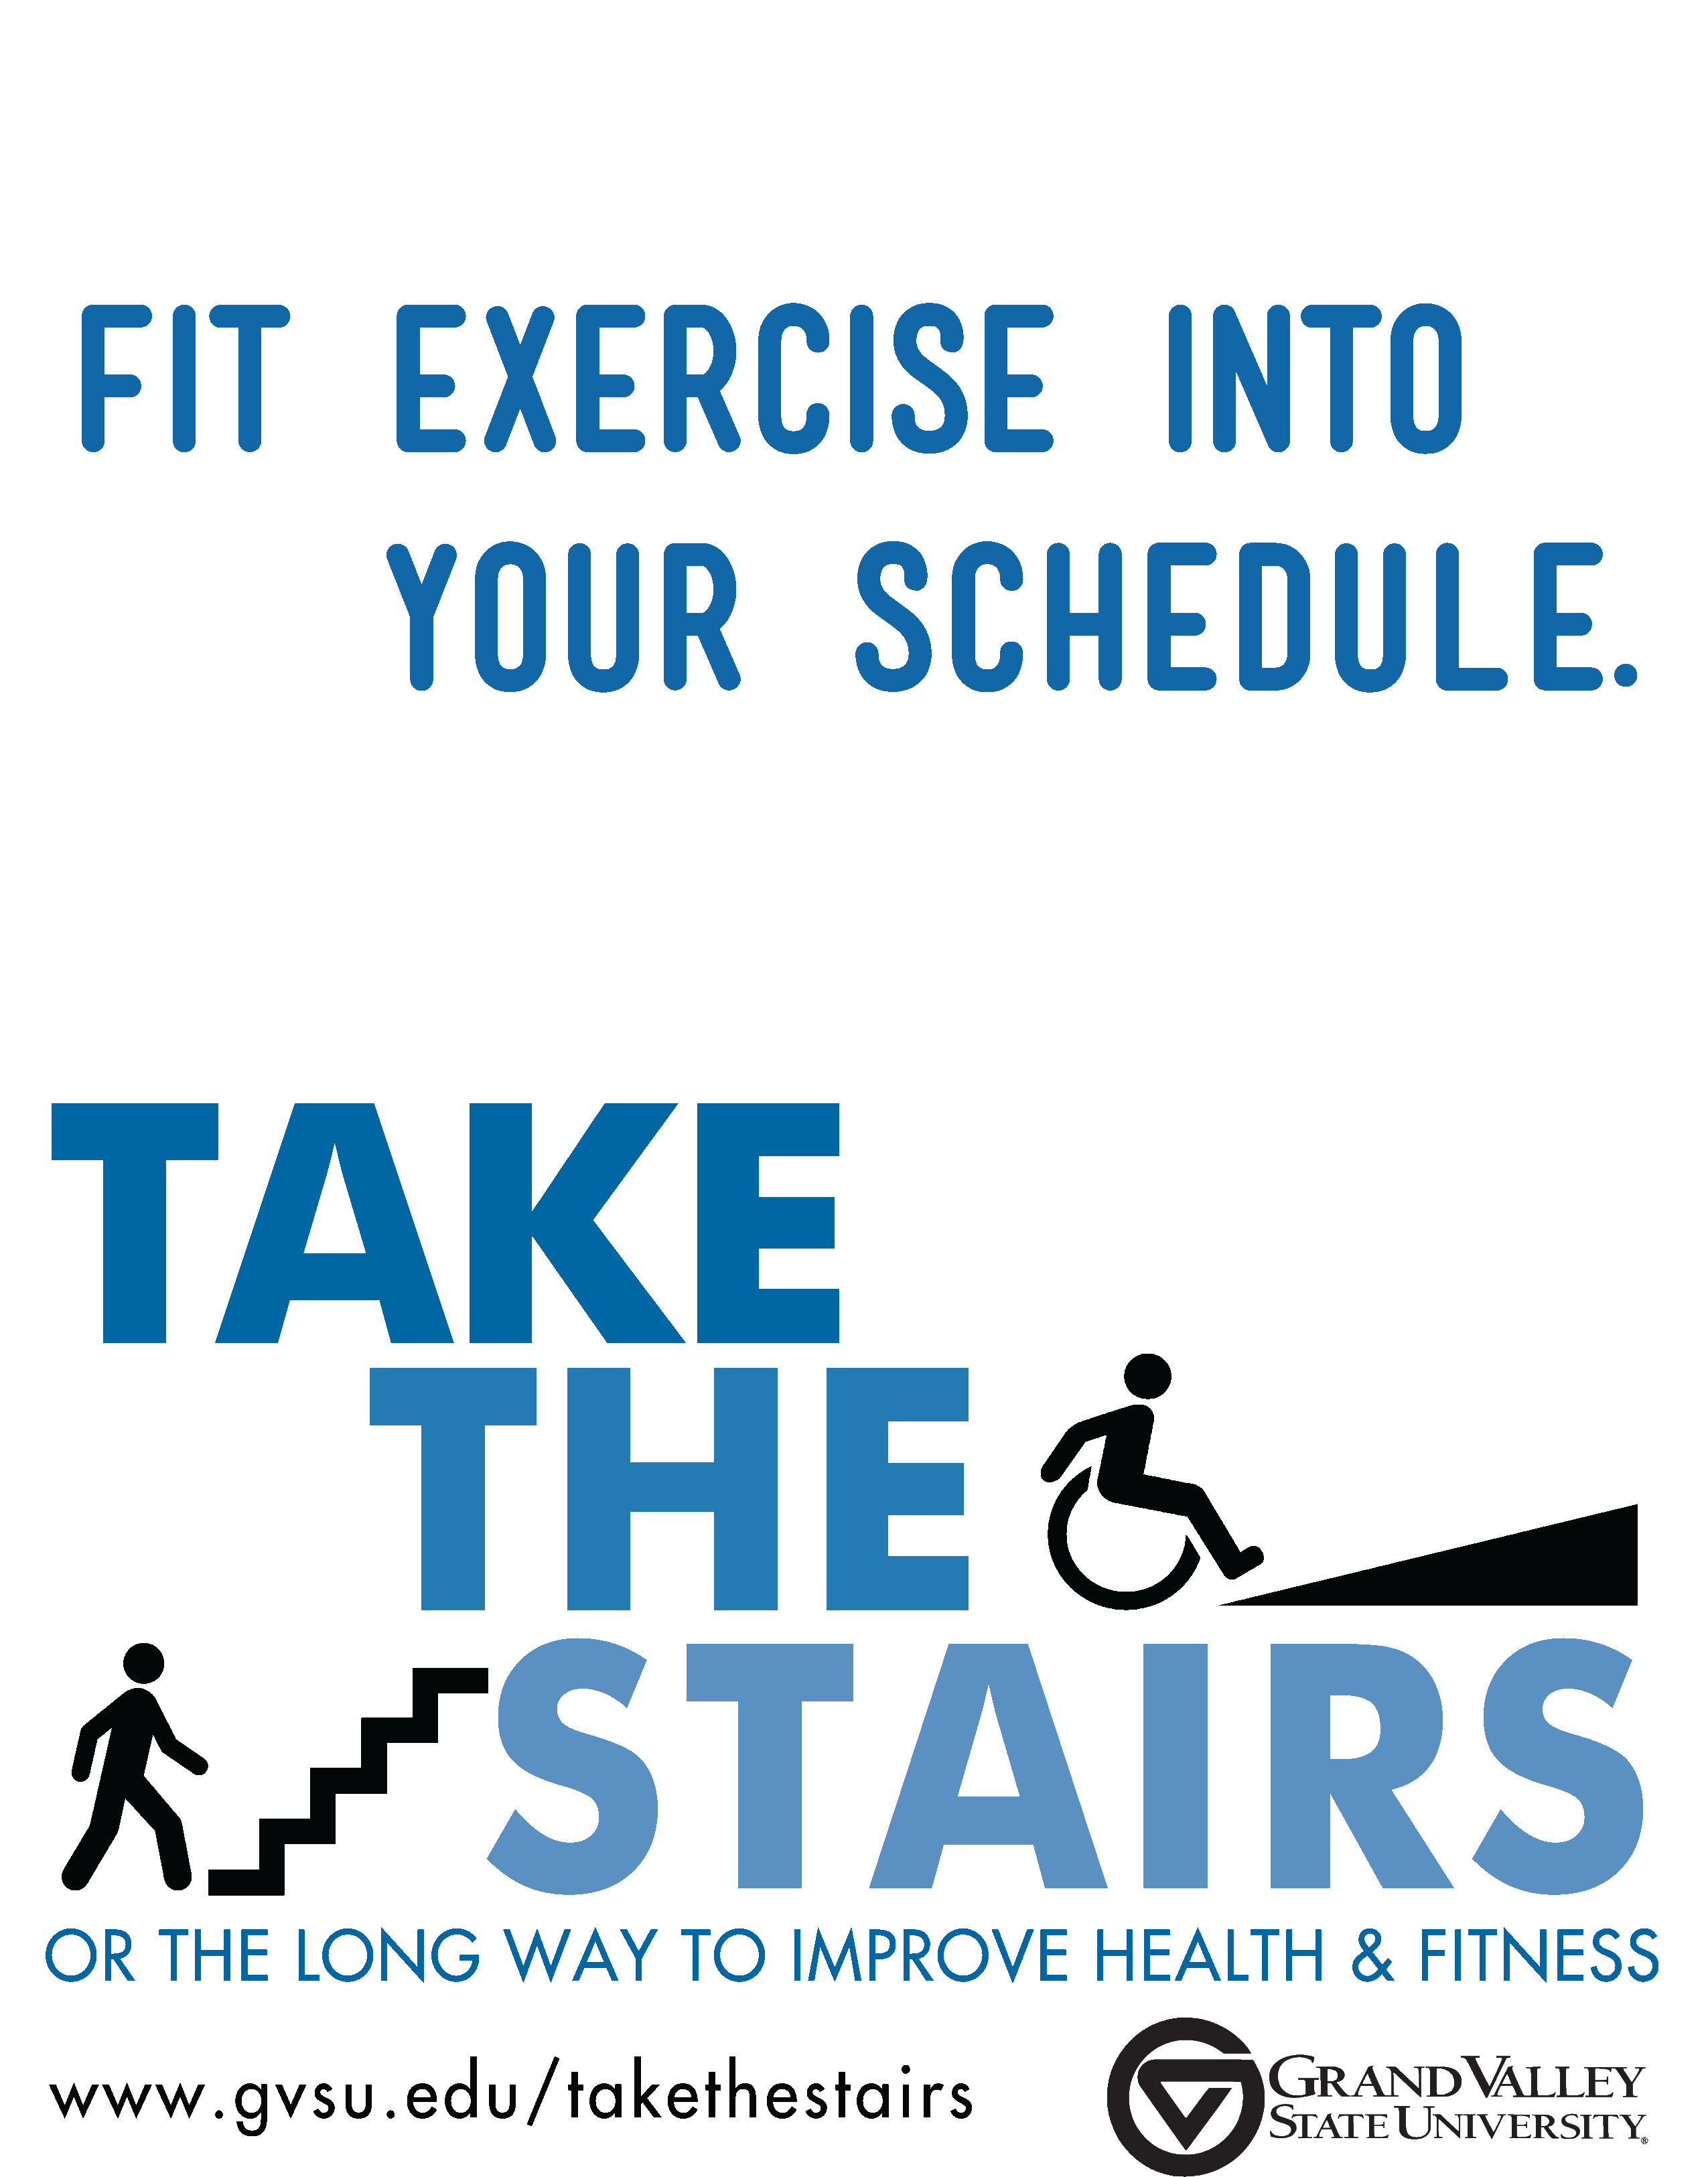 Fit exercise into your schedule: Take The Stairs